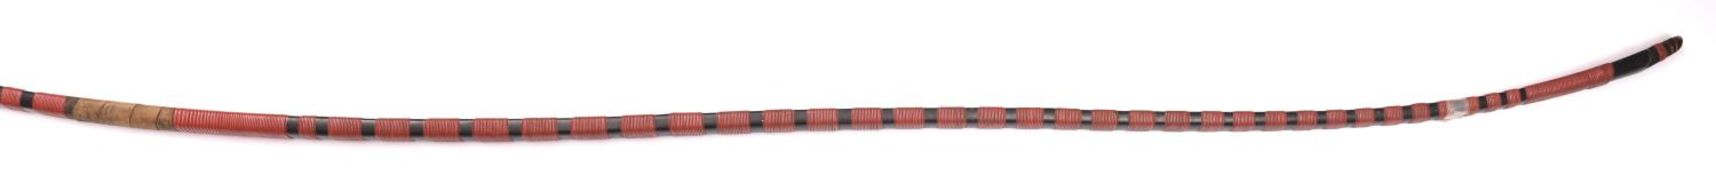 A Japanese bow, Yumi, 86? overall (7?2?), covered with black lacquer with bands of red lacquer